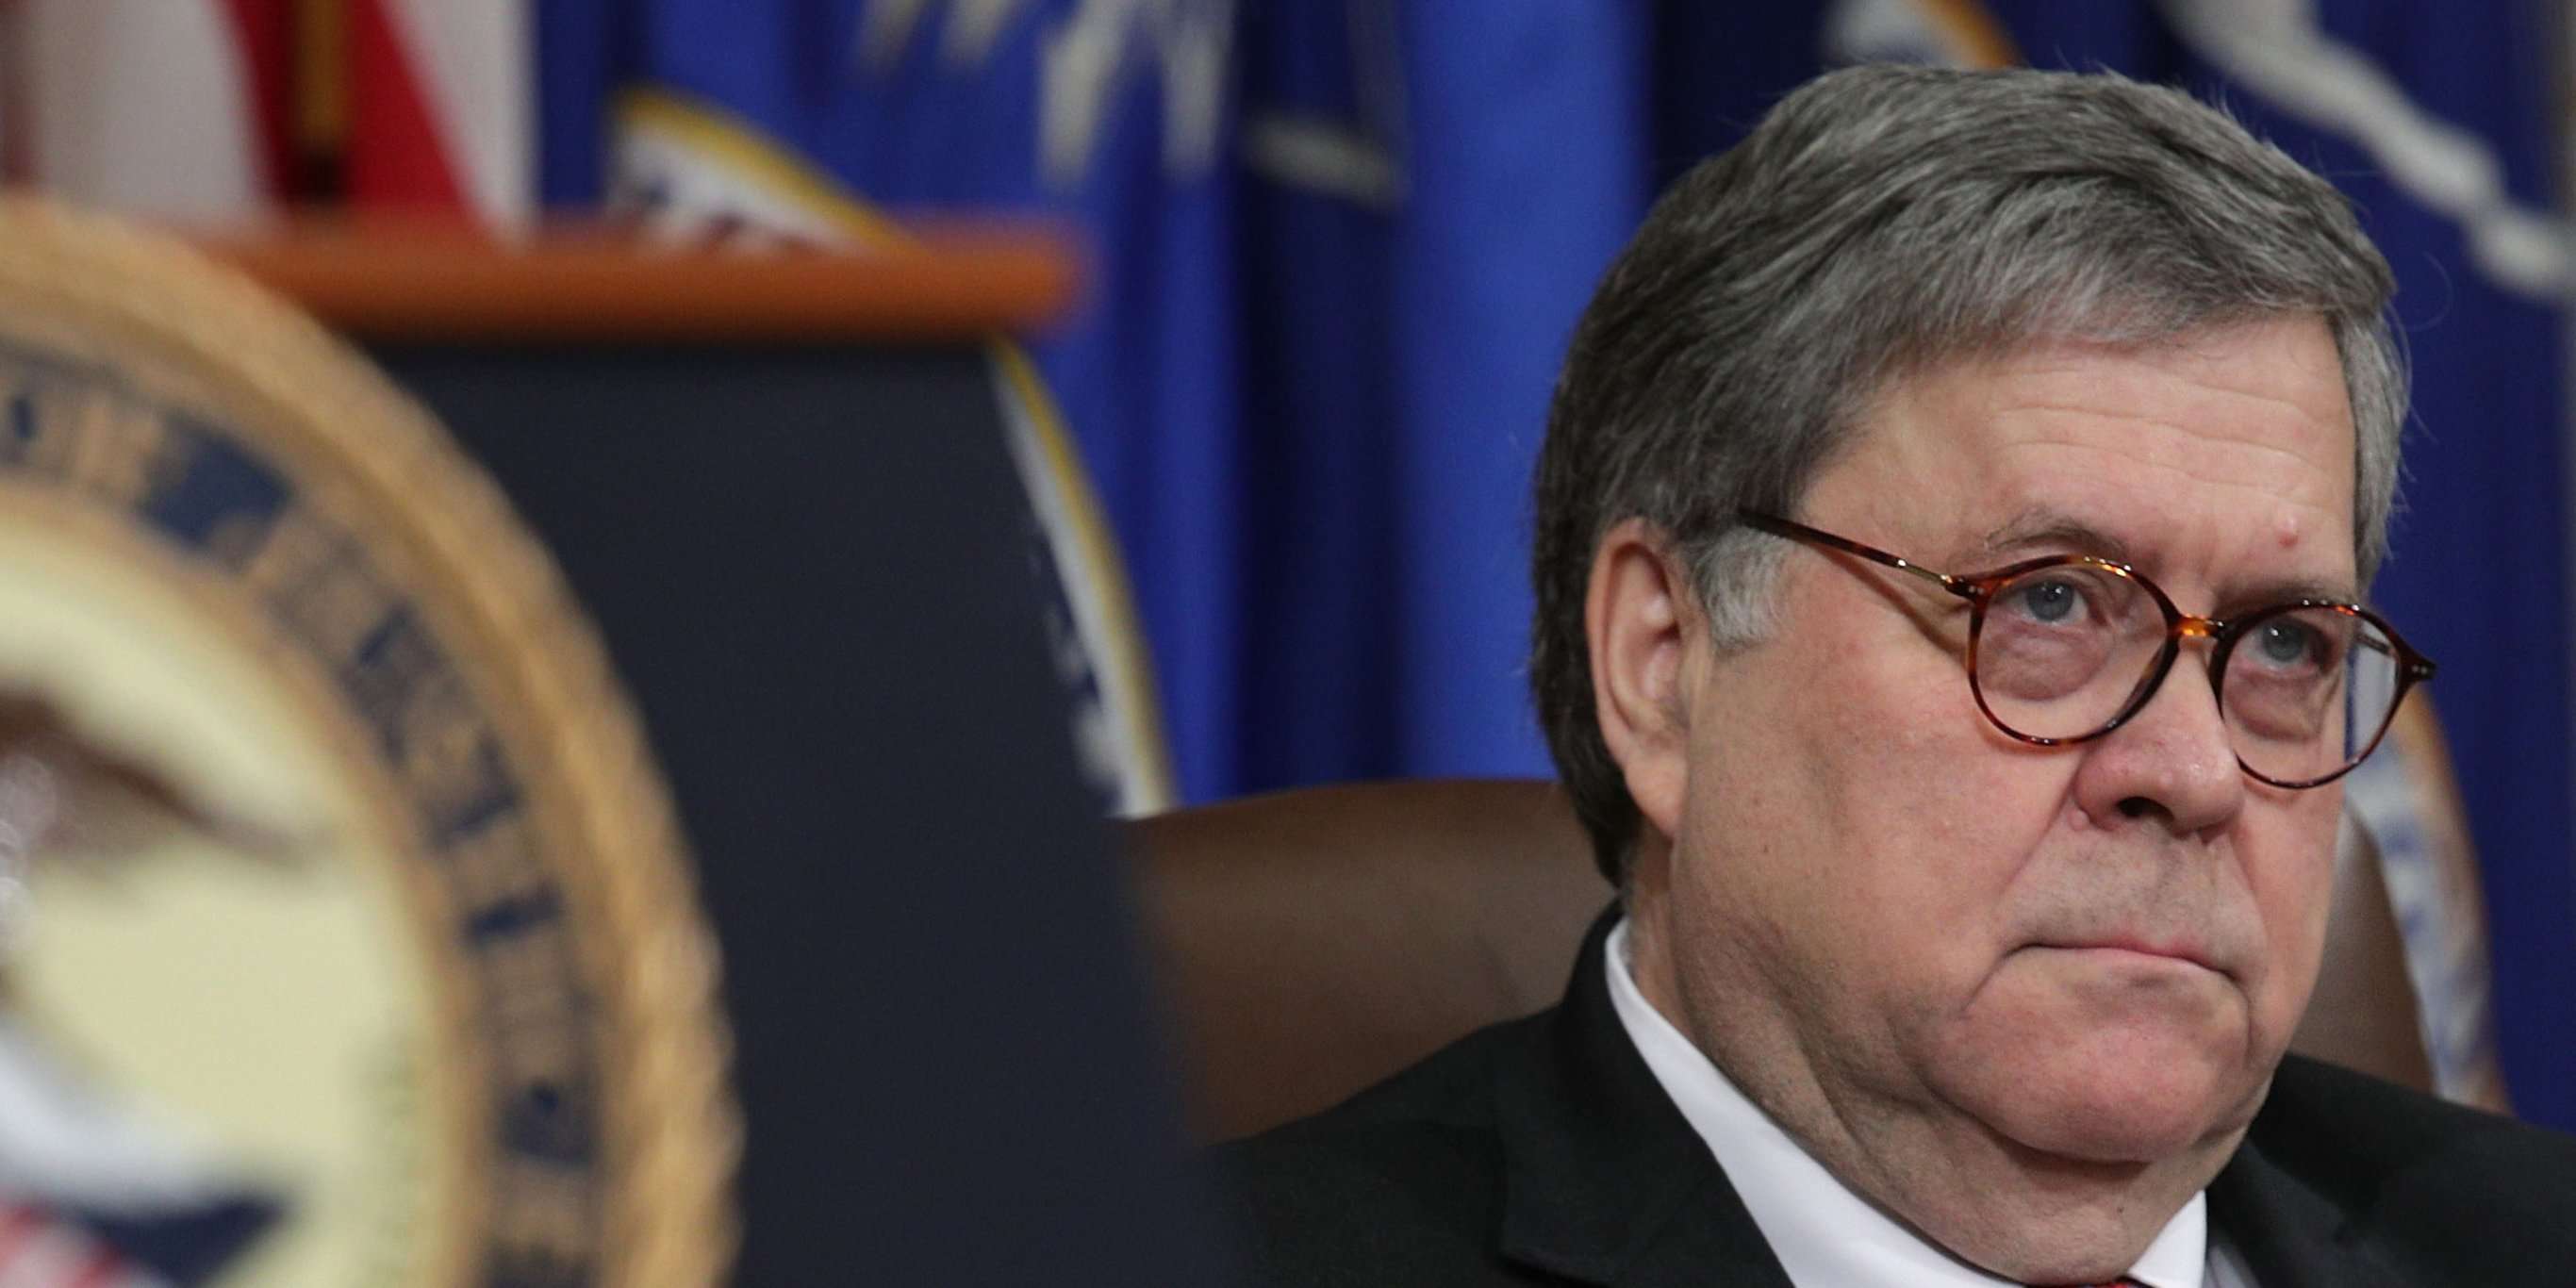 image for The House just voted to hold Attorney General William Barr and former White House Counsel Don McGahn in civil contempt